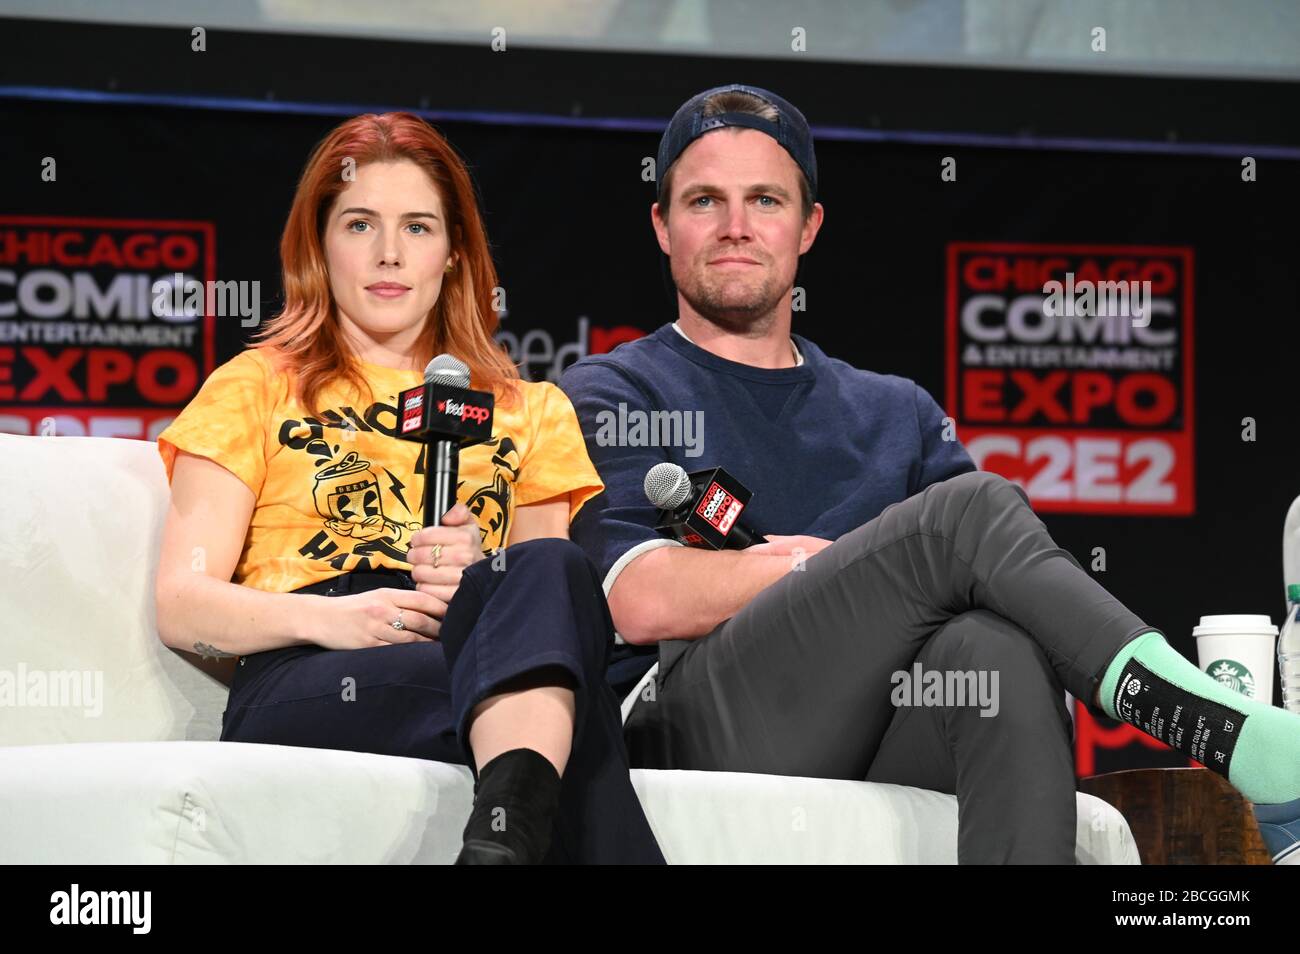 Chicago Comic & Entertainment Expo (C2E2) 2020 at McCormick Place  Convention Center in Chicago, IL, USA on February 29, 2020 Featuring: Emily  Bett Rickards and Stephen Amell Where: Chicago, Illinois, United States